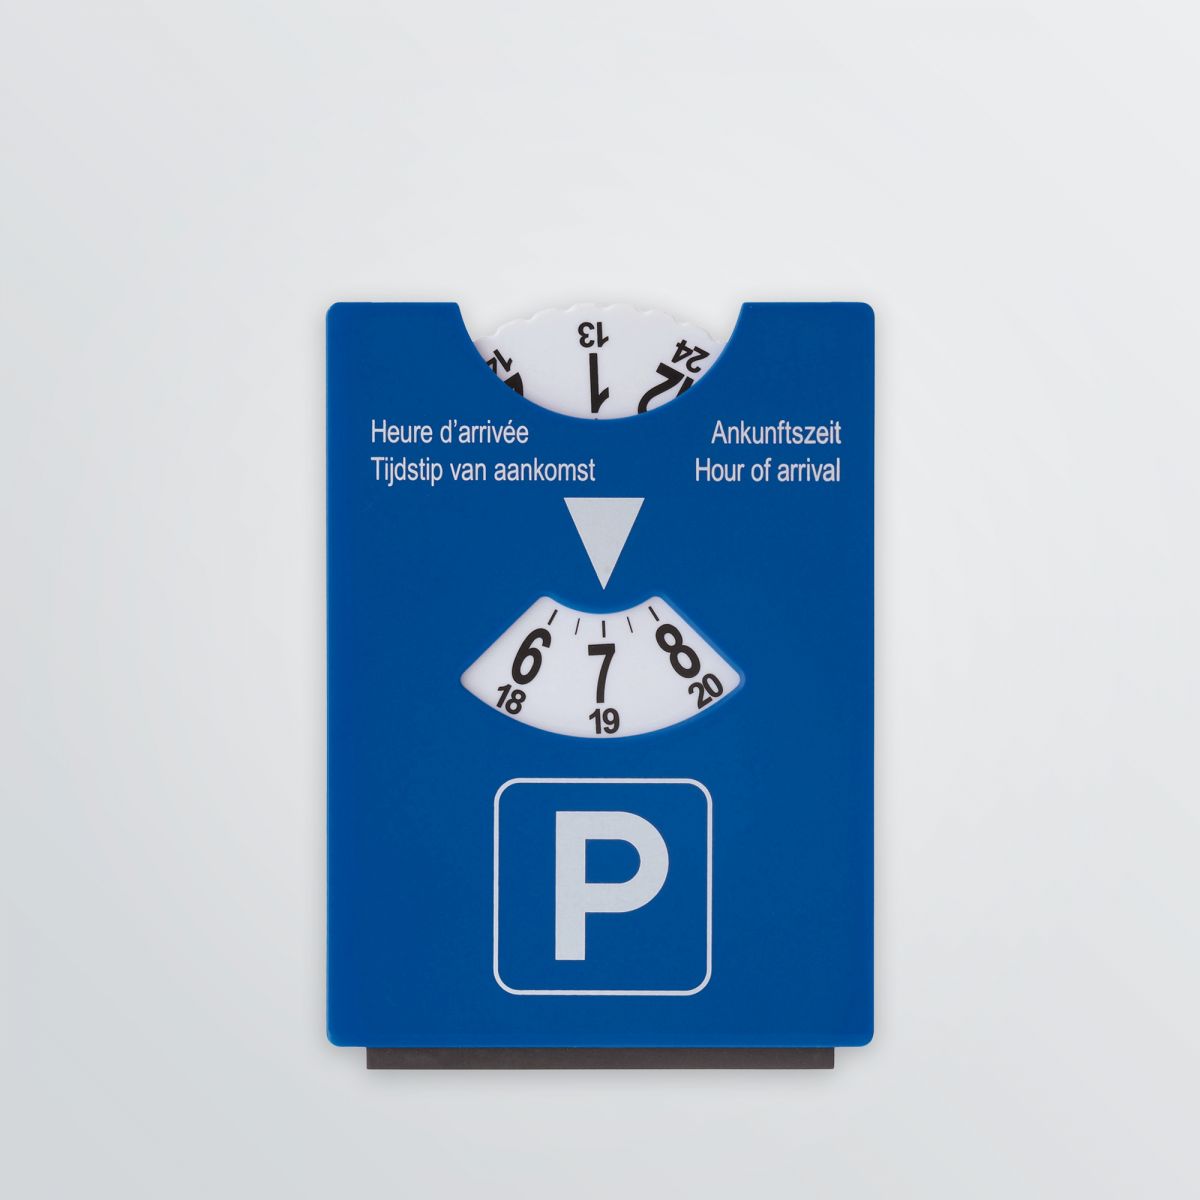 product] A parking disc used for parking your car in designated